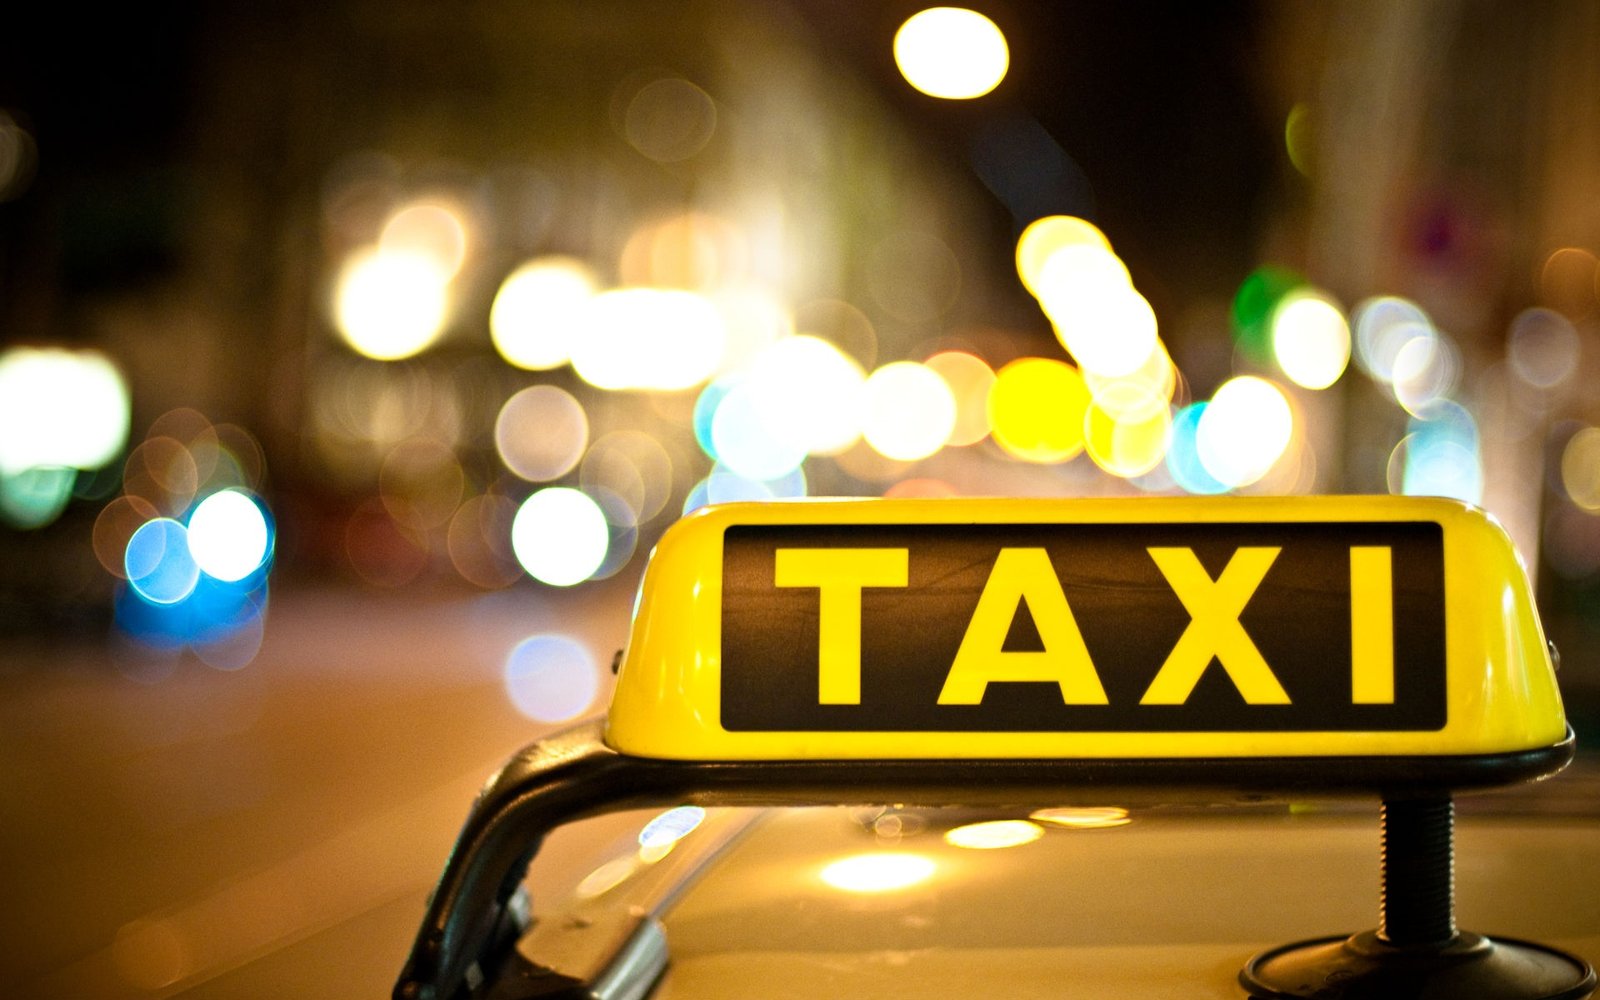 Looking for a Cab Service for Better Travel Experience – Here is What You Need to Do